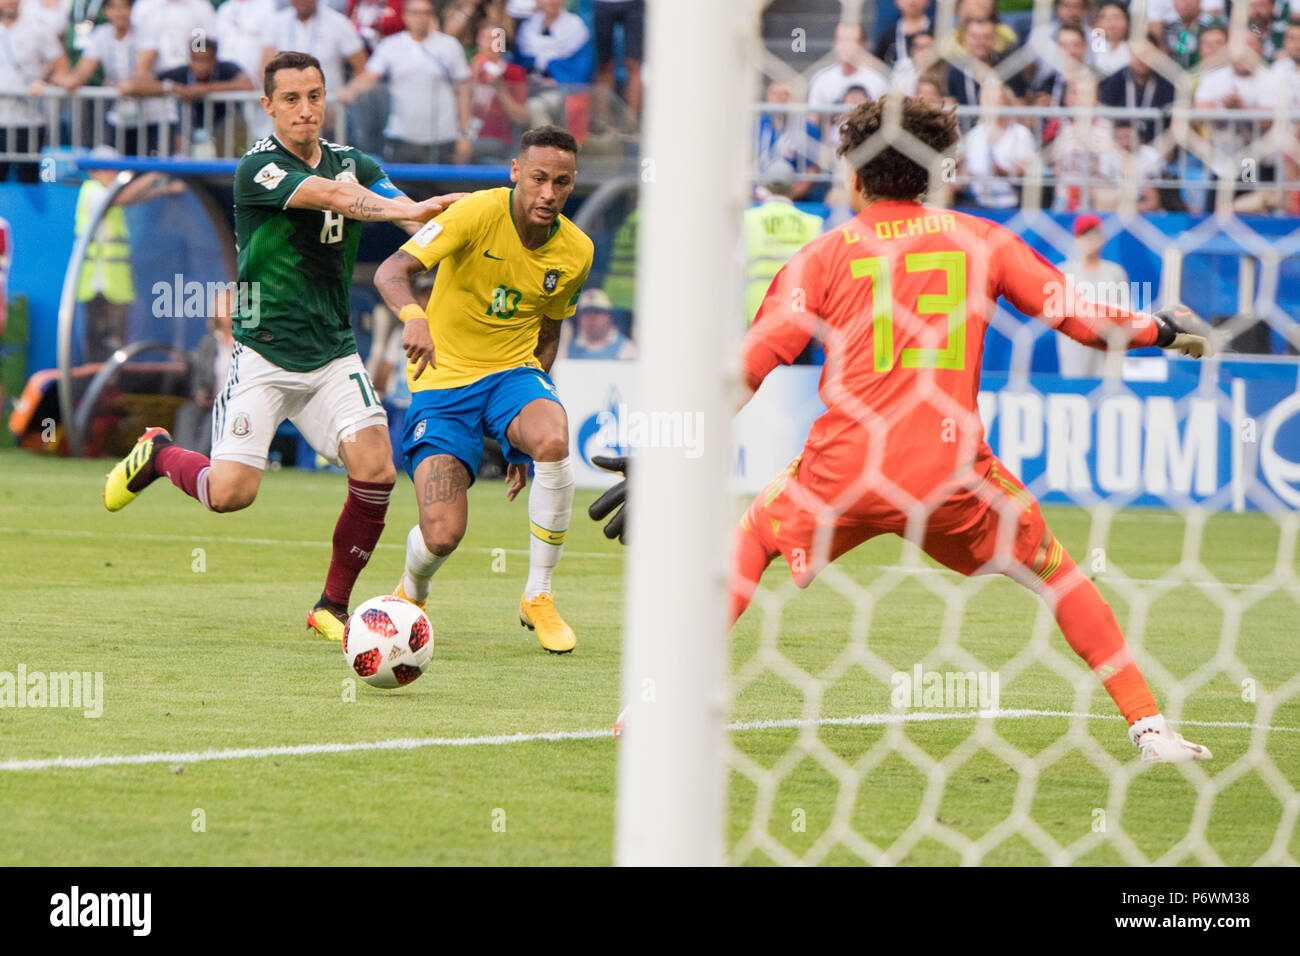 NEYMAR (mi., BRA) gives versus Andres GUARDADO (left, MEX) and goalkeeper Guillermo OCHOA (MEX) the 2: 0 goal for Brazil, action, fight for the ball, Brazil (BRA) - Mexico (RUS) 2: 0, round of 16, game 53, on 02.07.2018 in Samara; Football World Cup 2018 in Russia from 14.06. - 15.07.2018. | usage worldwide Stock Photo